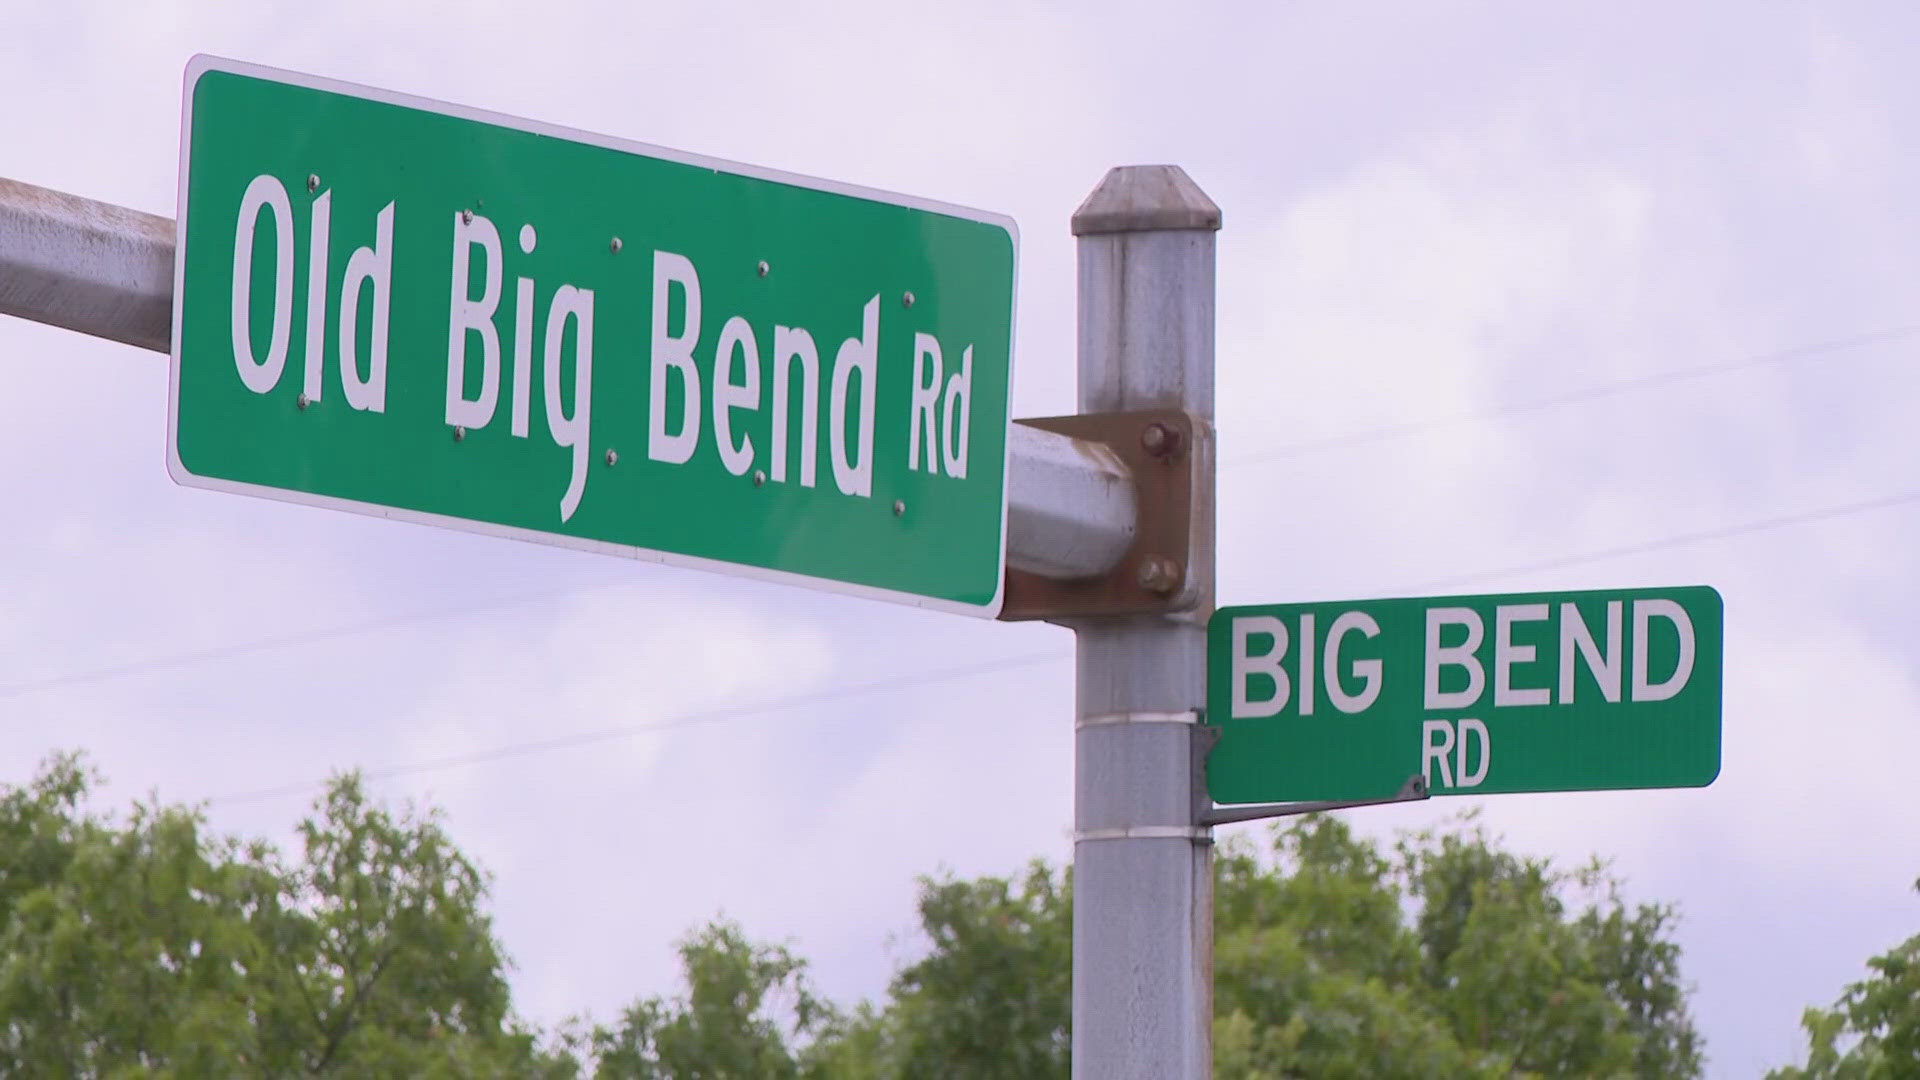 Kirkwood leaders are set to vote Thursday on a resolution requesting St. Louis County lower the speed limit on Big Bend Road to 30 mph.